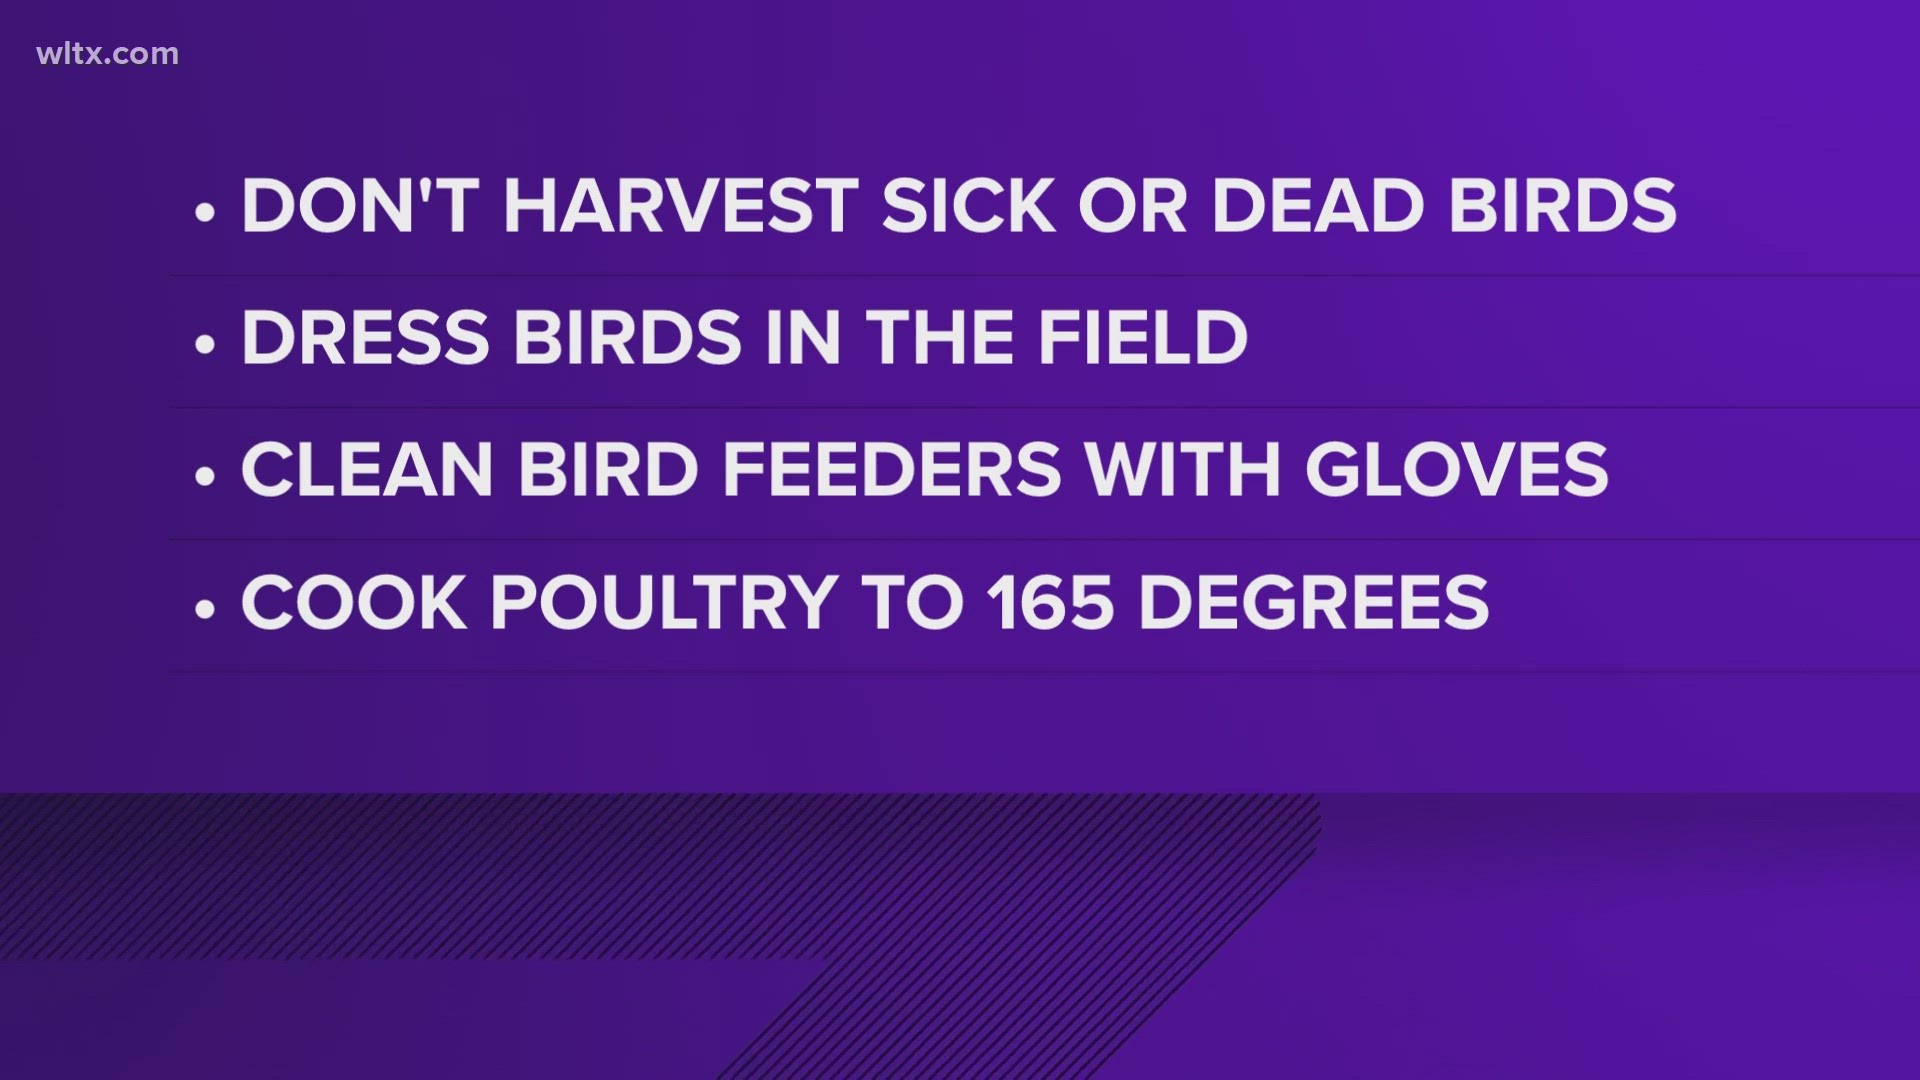 How to prevent the spread of avian flu from wild birds to domesticated flocks, tips from SC Department of Natural Resources